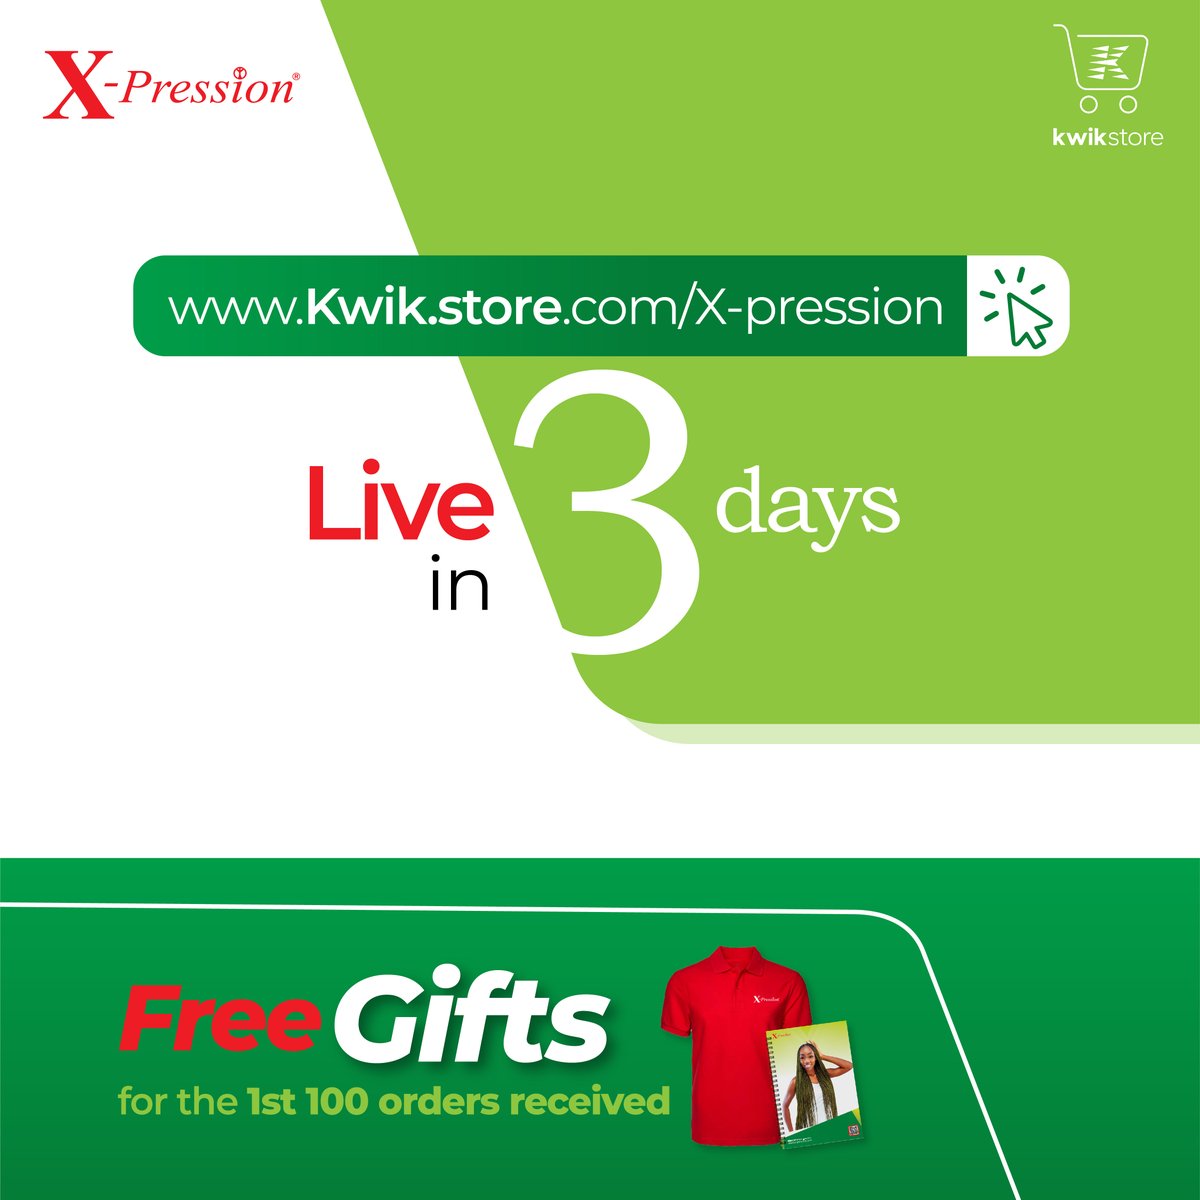 Are you readyyyyyy!!! We go live in 3 days, guys!

Plenty of gifts to be won for the first 100 orders! @xp4you @getkwikstore

#Xpression #Solpia #KwikDelivery #Kwikstore #Launch #Live